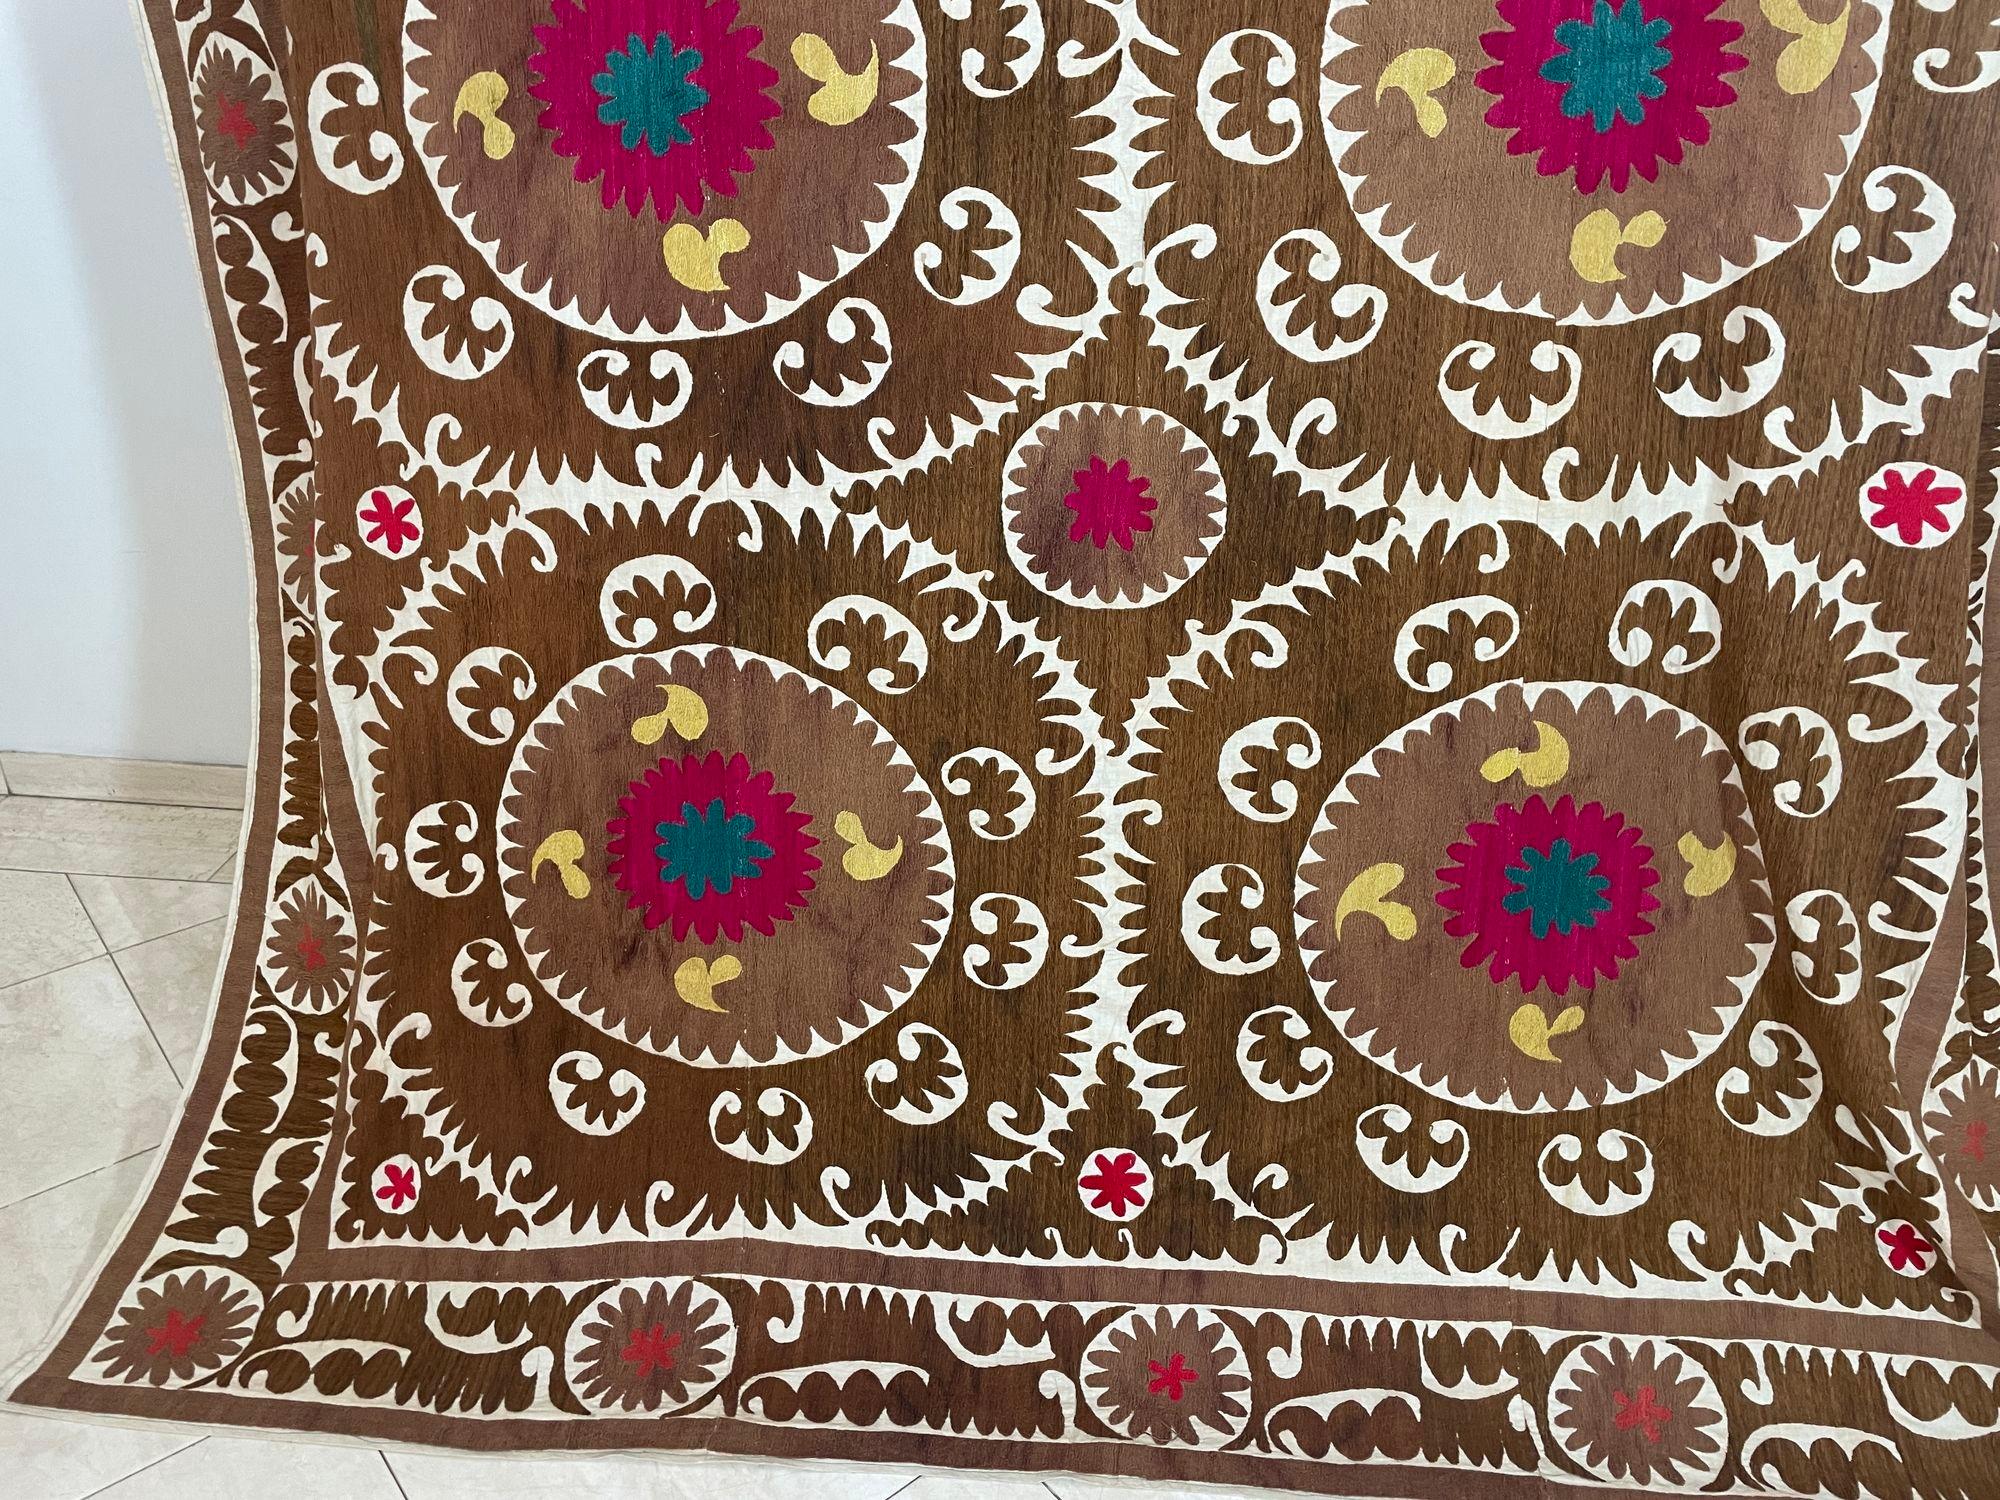 Hand-Crafted Vintage Embroidered Uzbekistan Suzani Tapestry Wall Hanging Brown and Pink XL For Sale